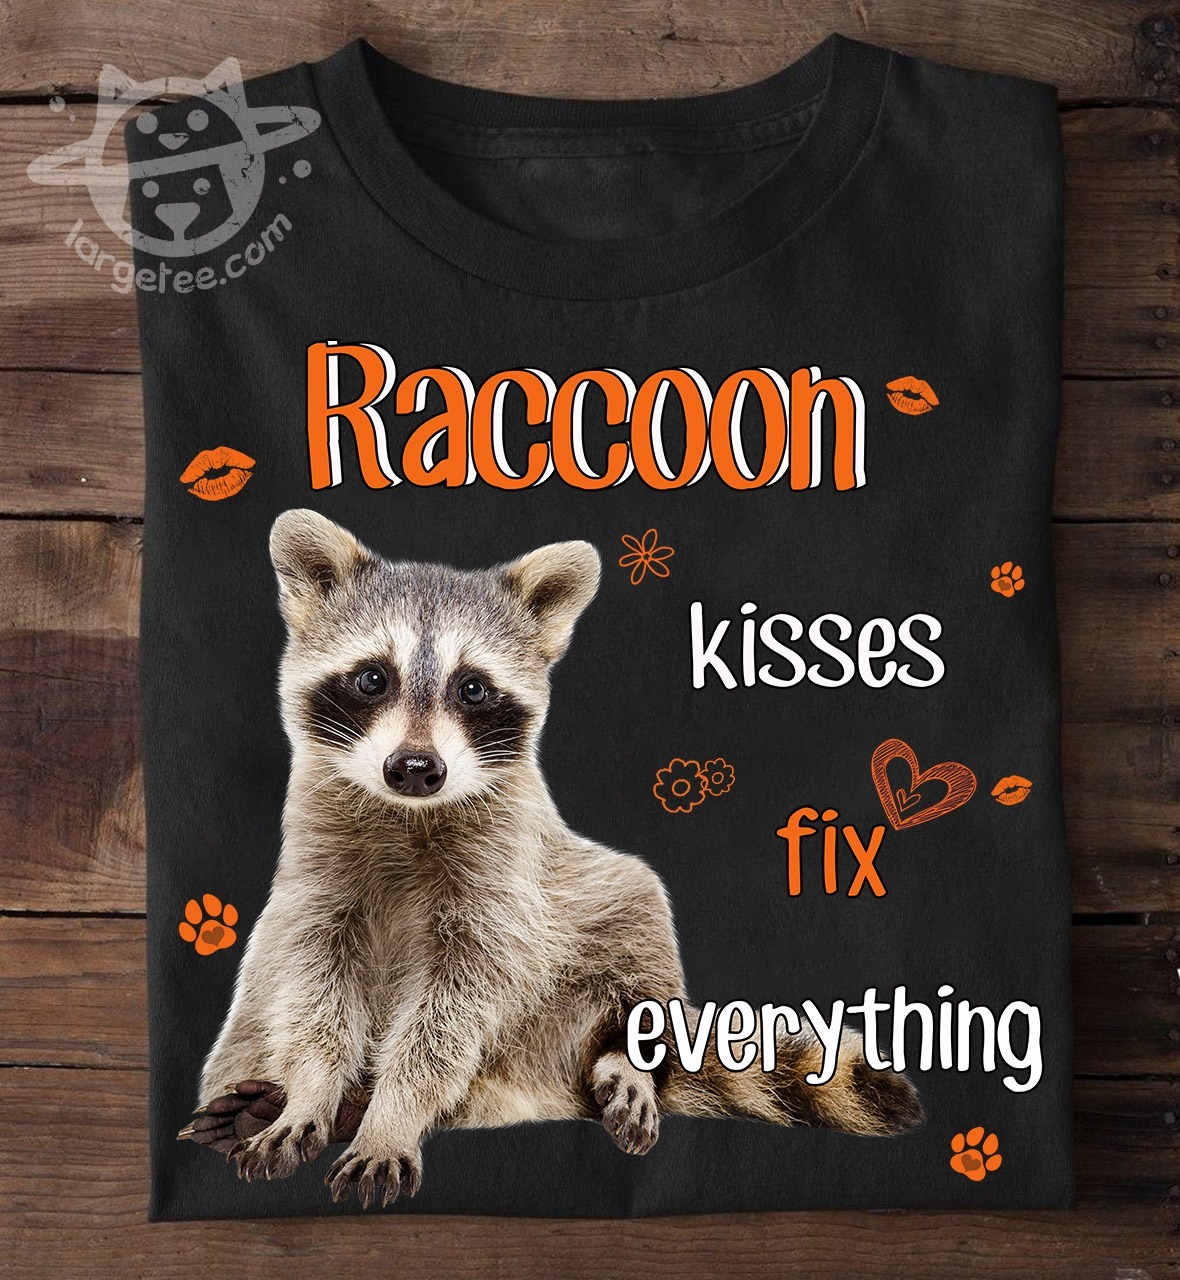 Raccoon kisses fix everything